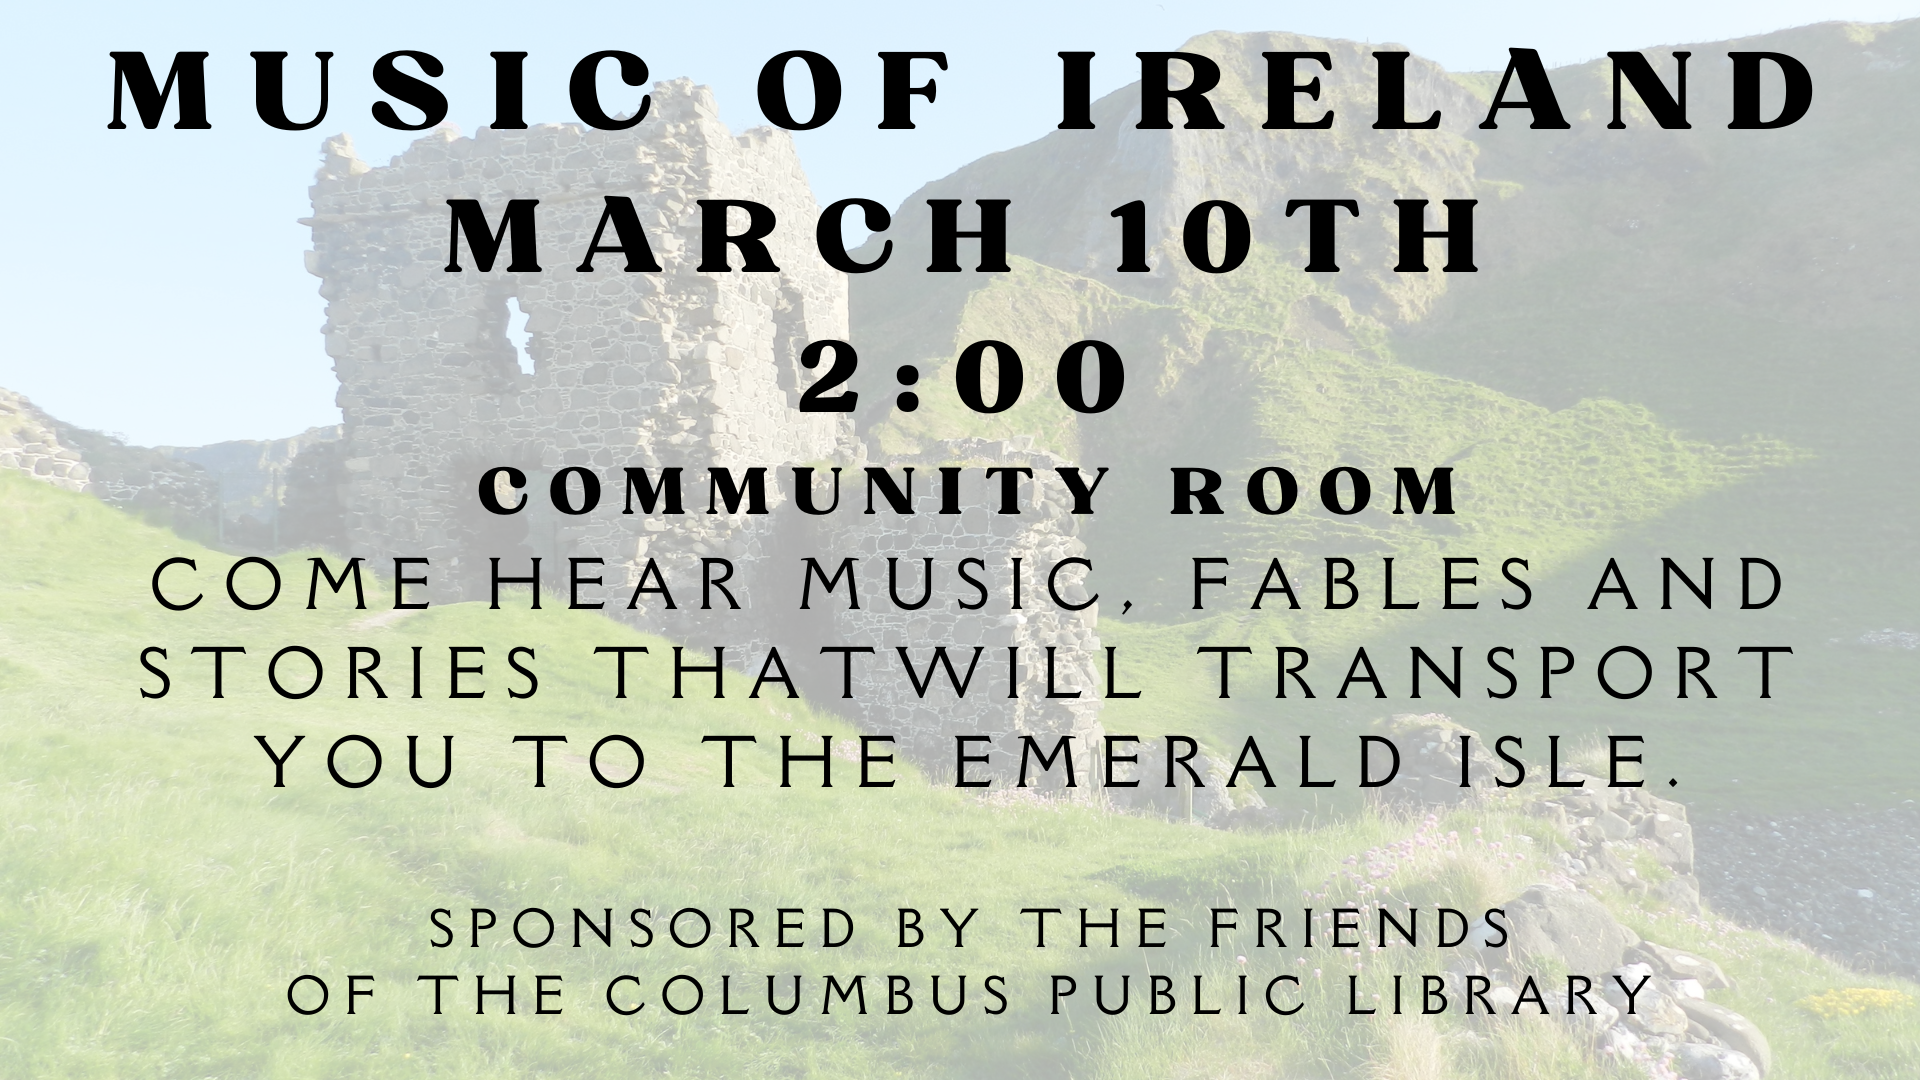 Music of Ireland March 10th at 2:00 pm